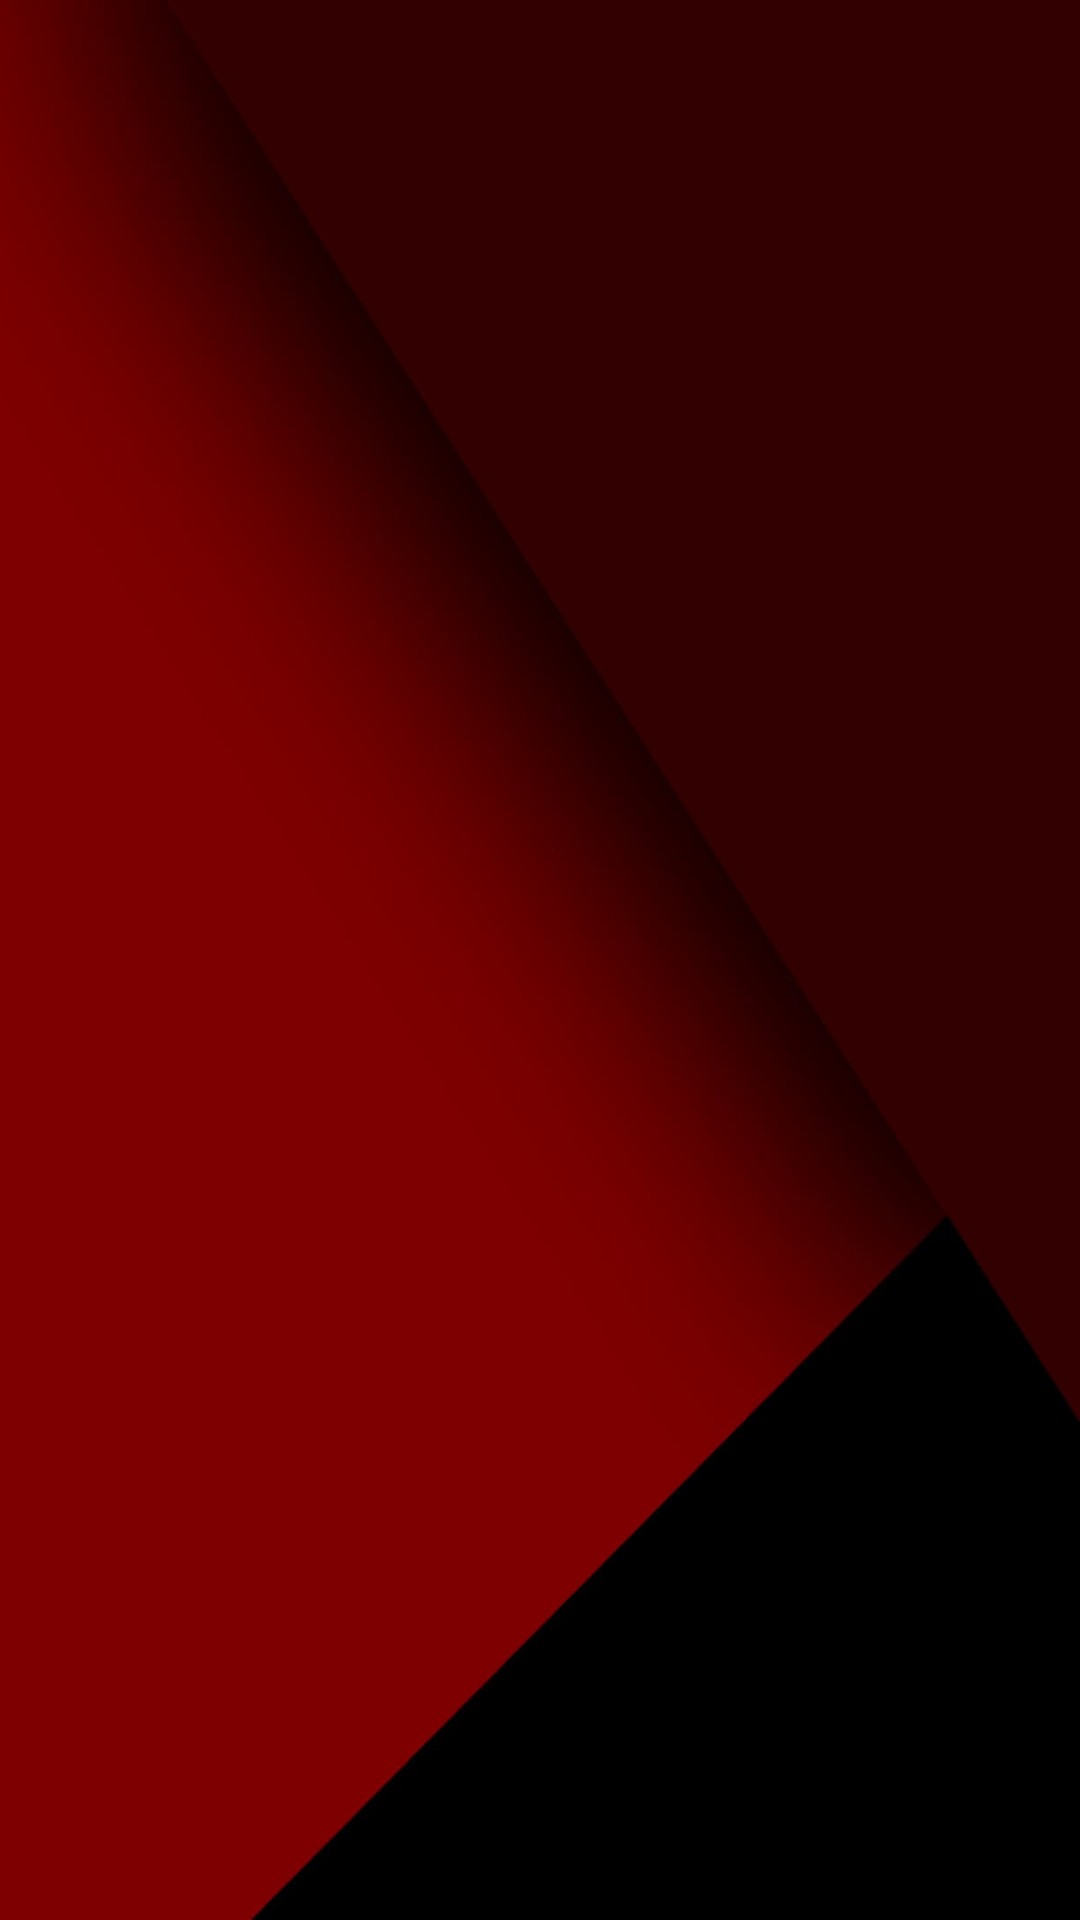 Isometric Strips Wallpaper for HTC One